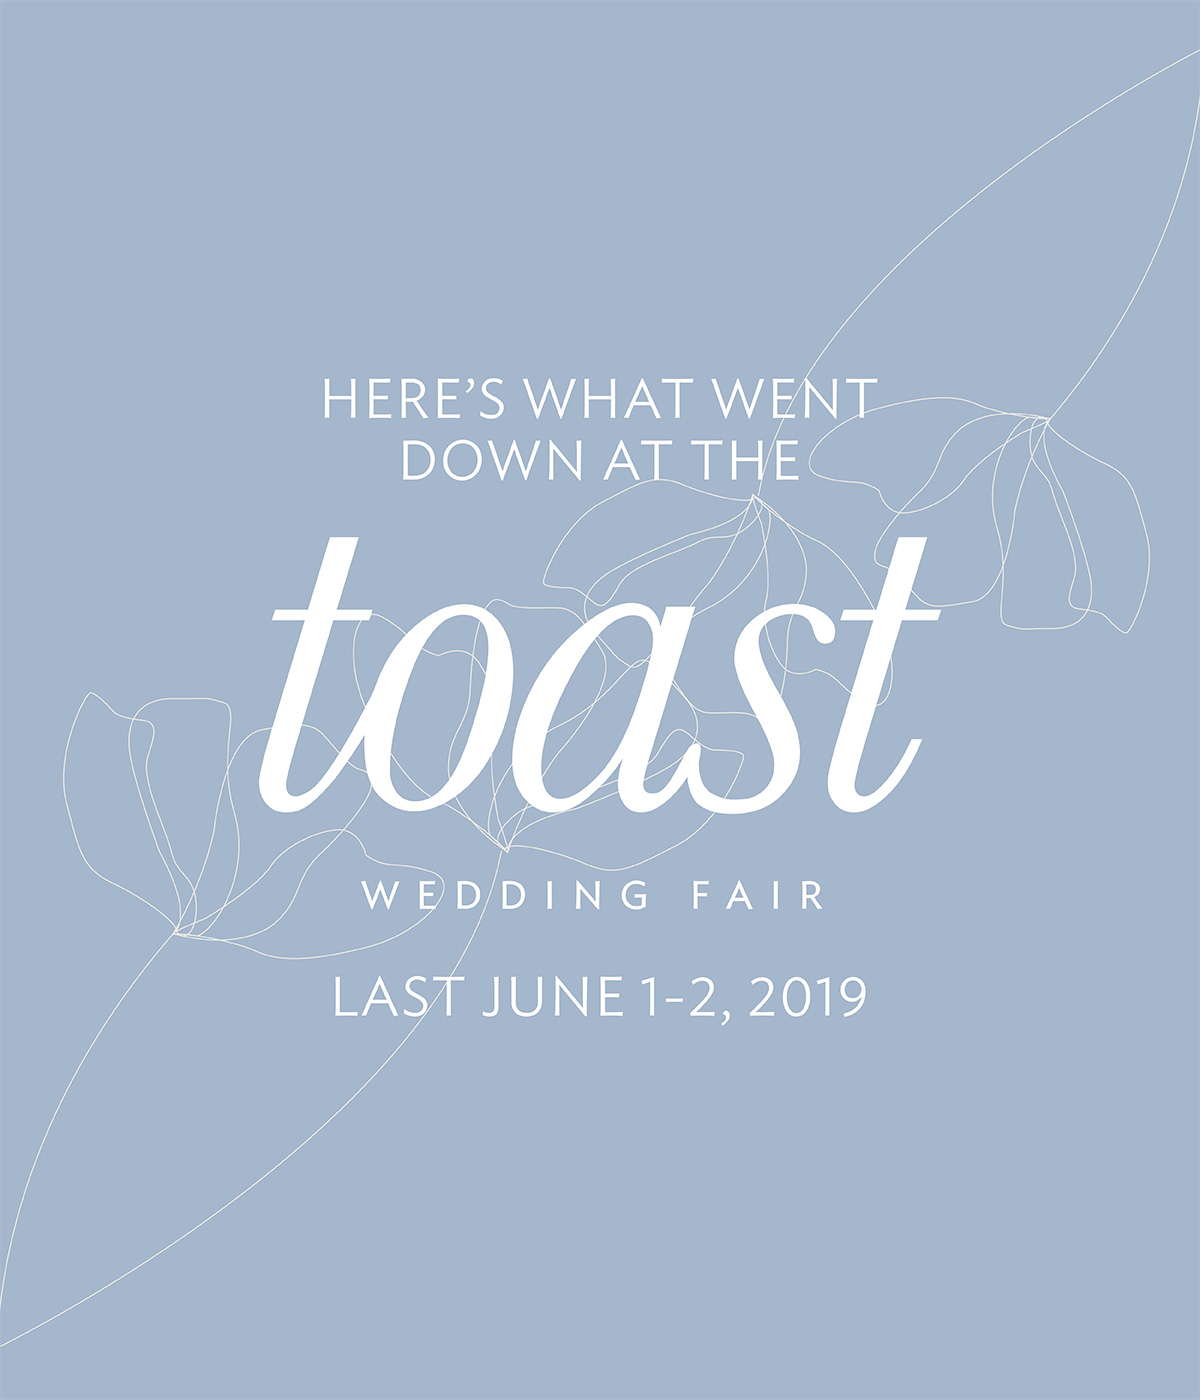 Here's what went down at the Toast wedding fair last June 1-2. 2019